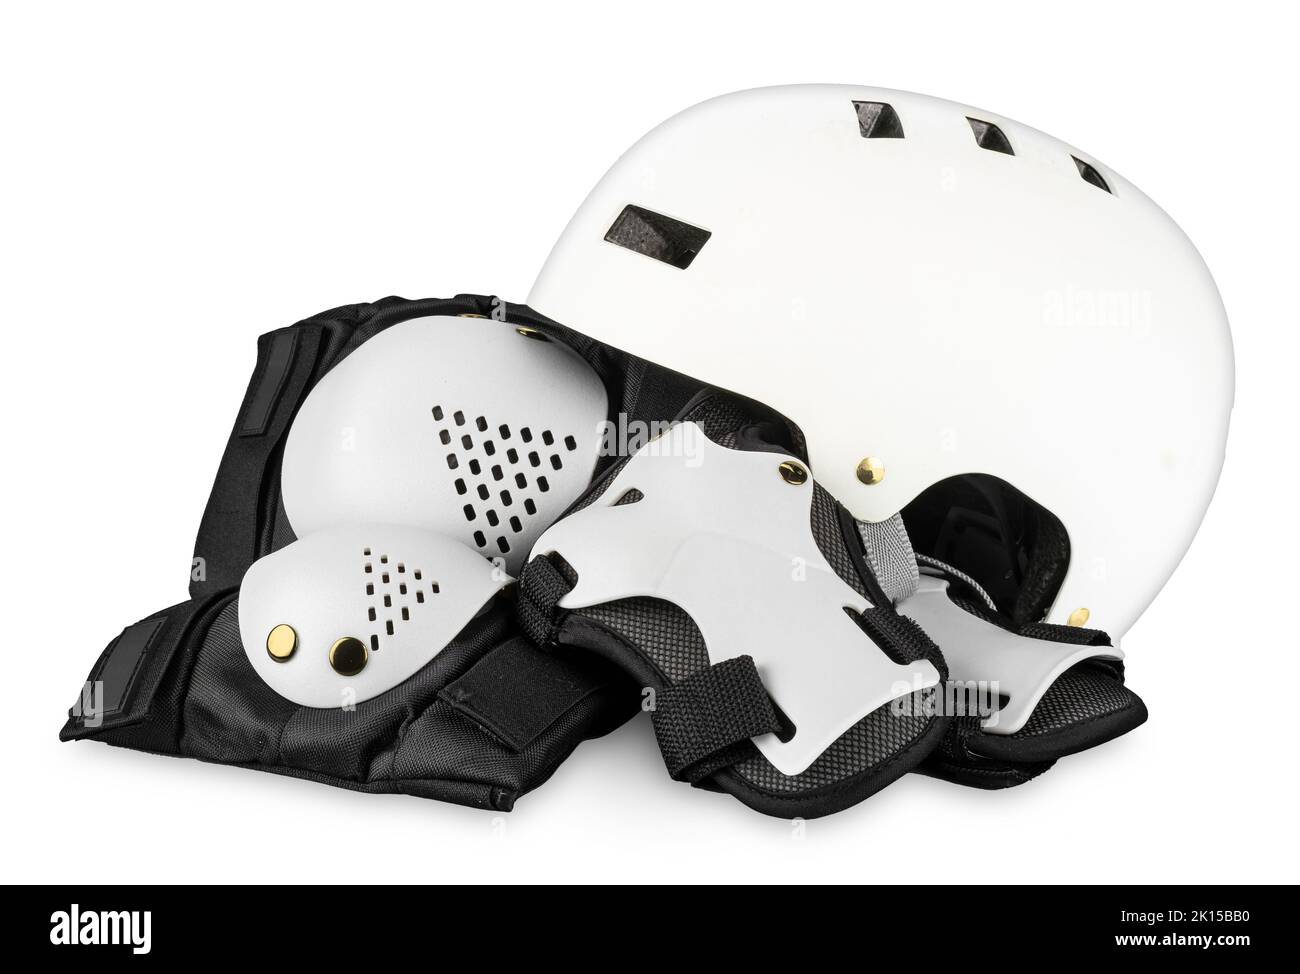 White black skateboard or inlane skating saftey equipment like skate helmet wrist knee and elbow protector pads on isolated background with clipping p Stock Photo